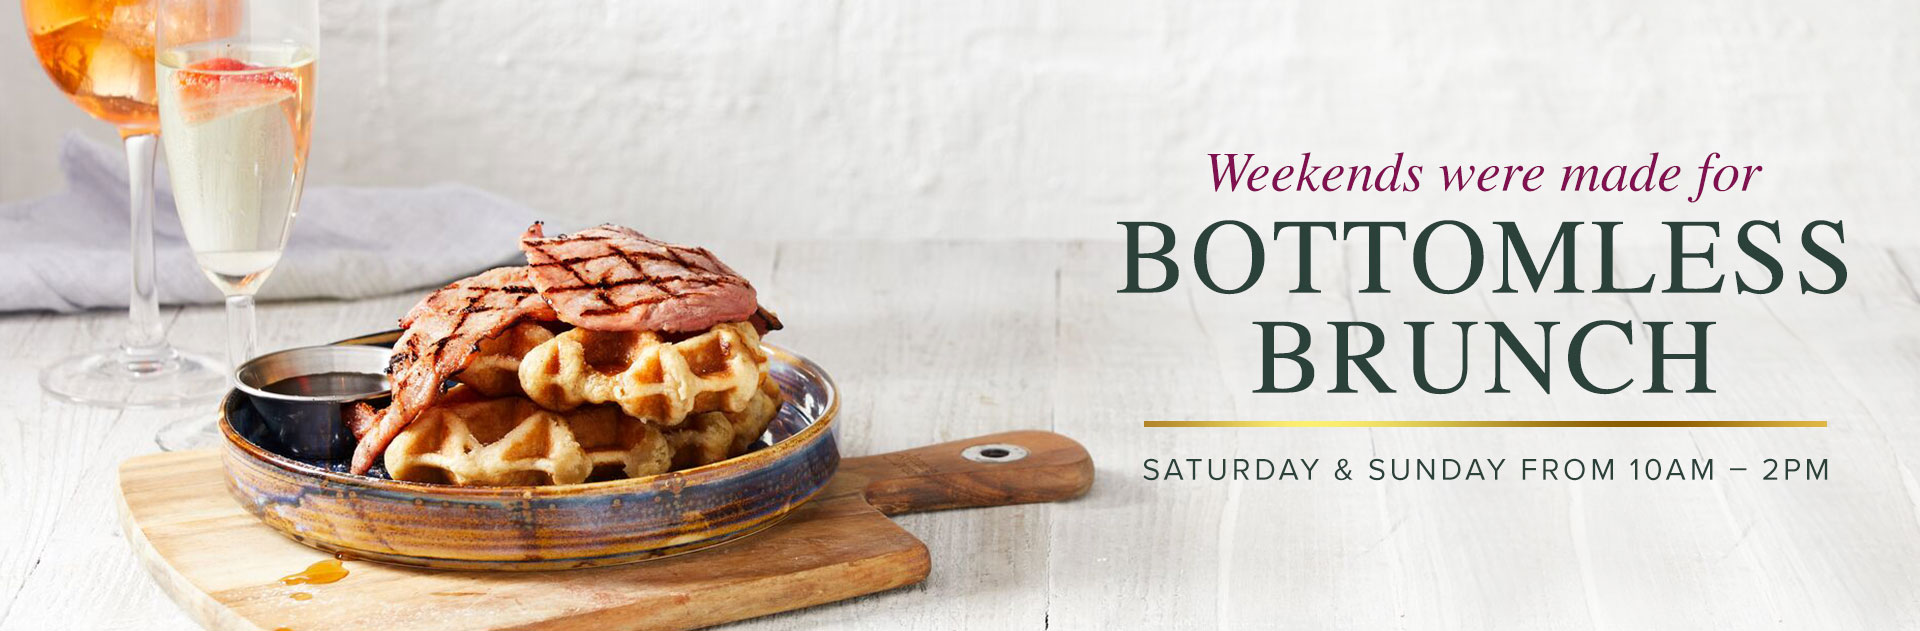 Ember Inns The Fieldhouse bottomless brunch of bacon, waffles and drinks